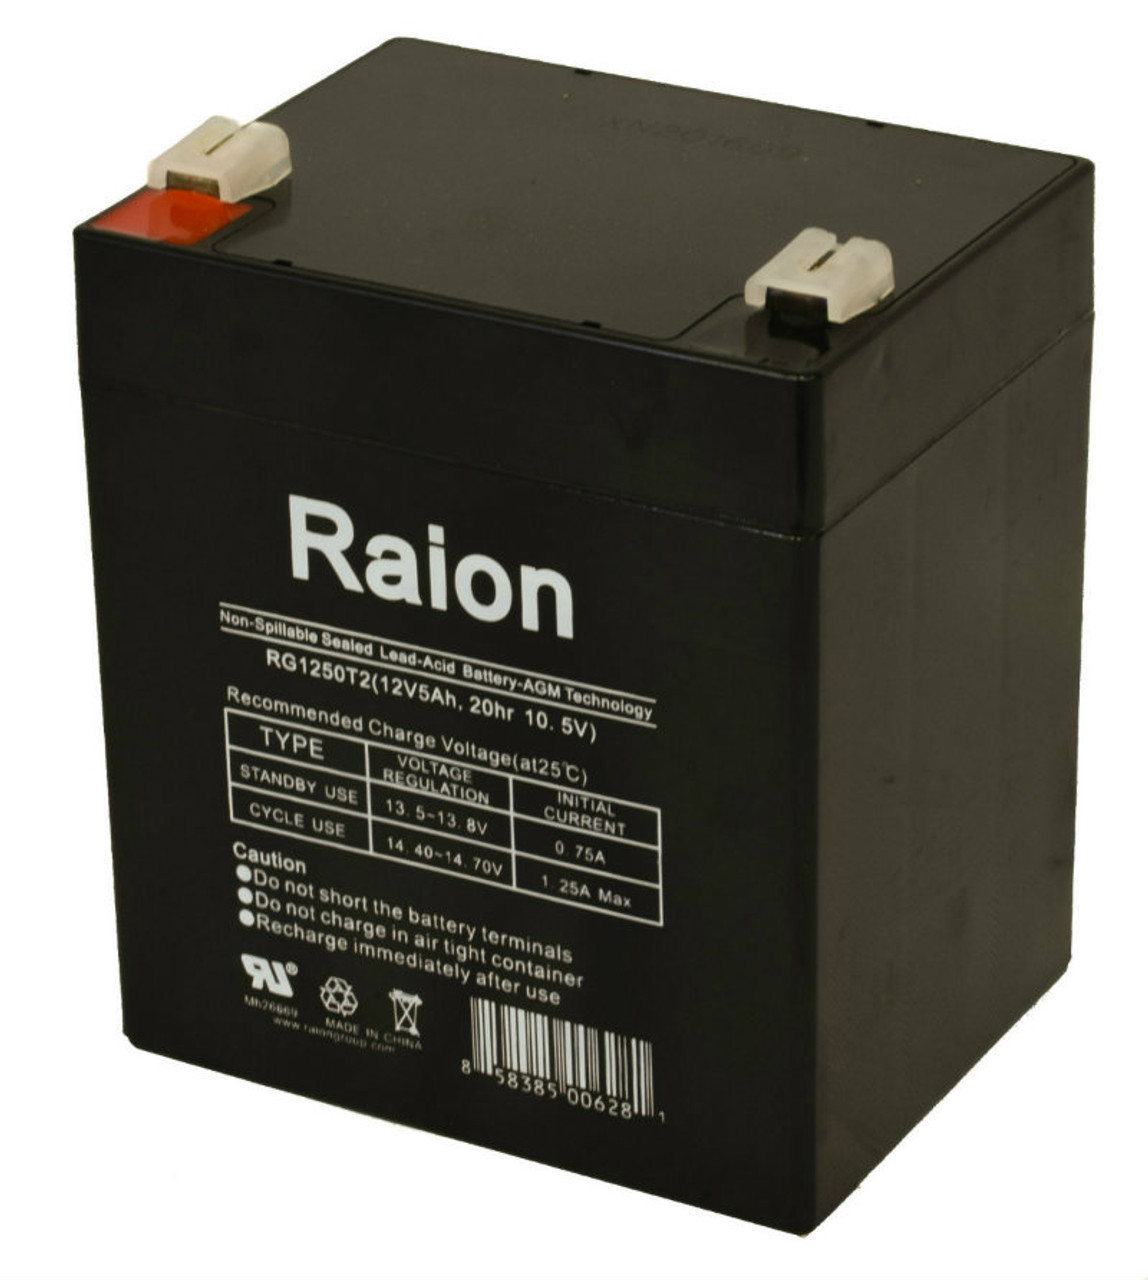 Raion Power RG1250T1 Replacement Battery for Liven LV5.0-12 F1